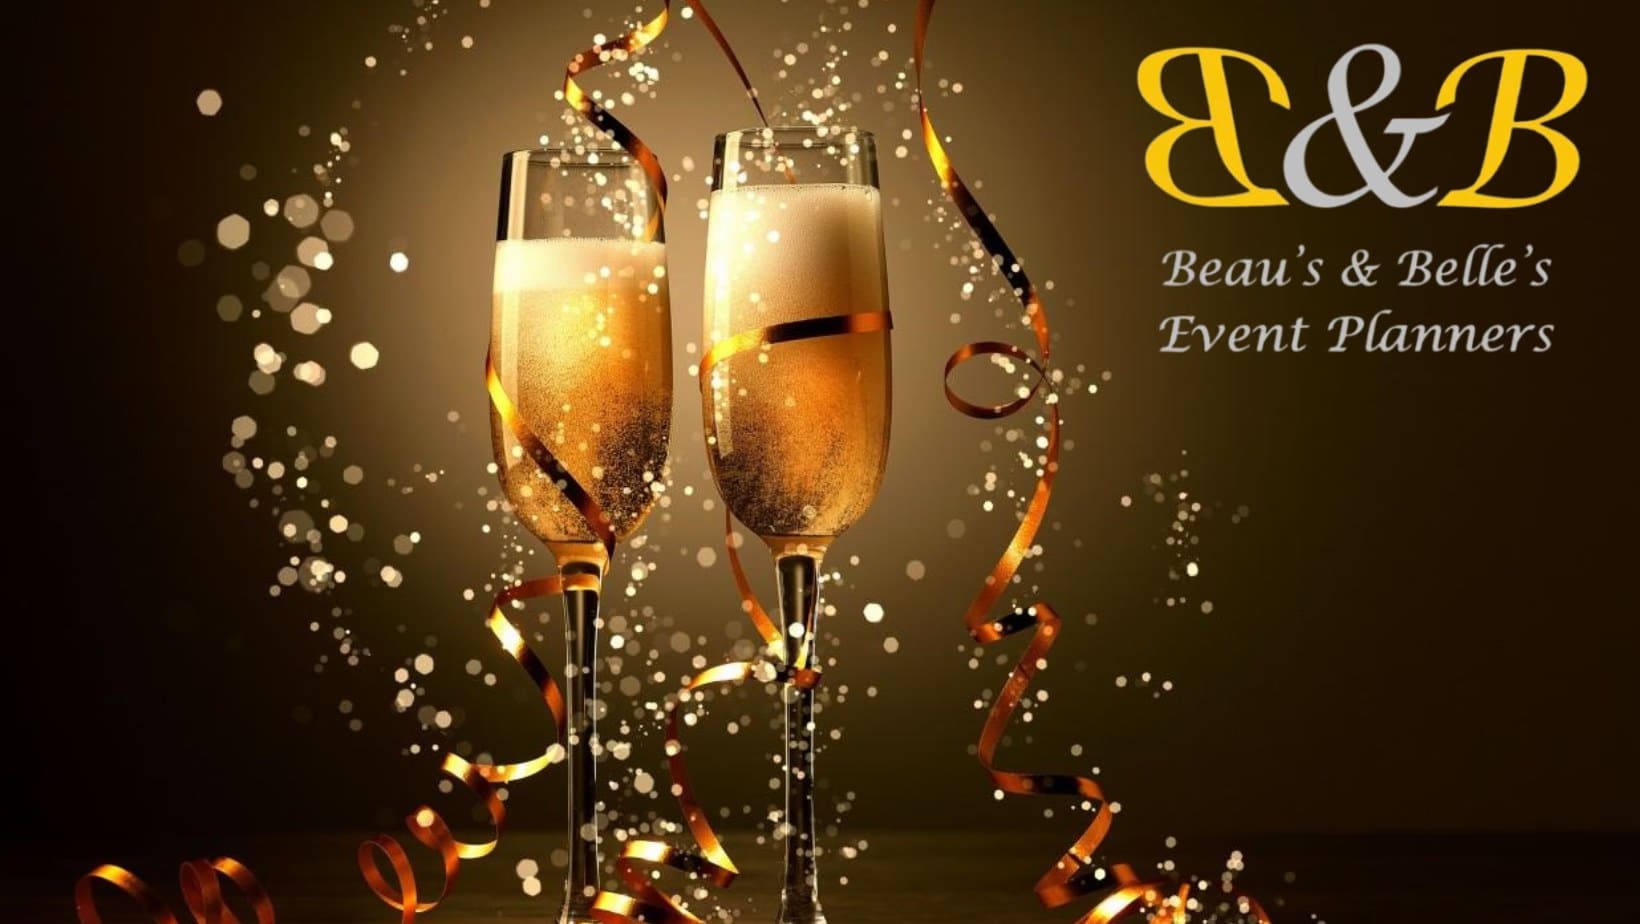 Beau's & Belle's Event Planners - Specialise in Organising Weddings